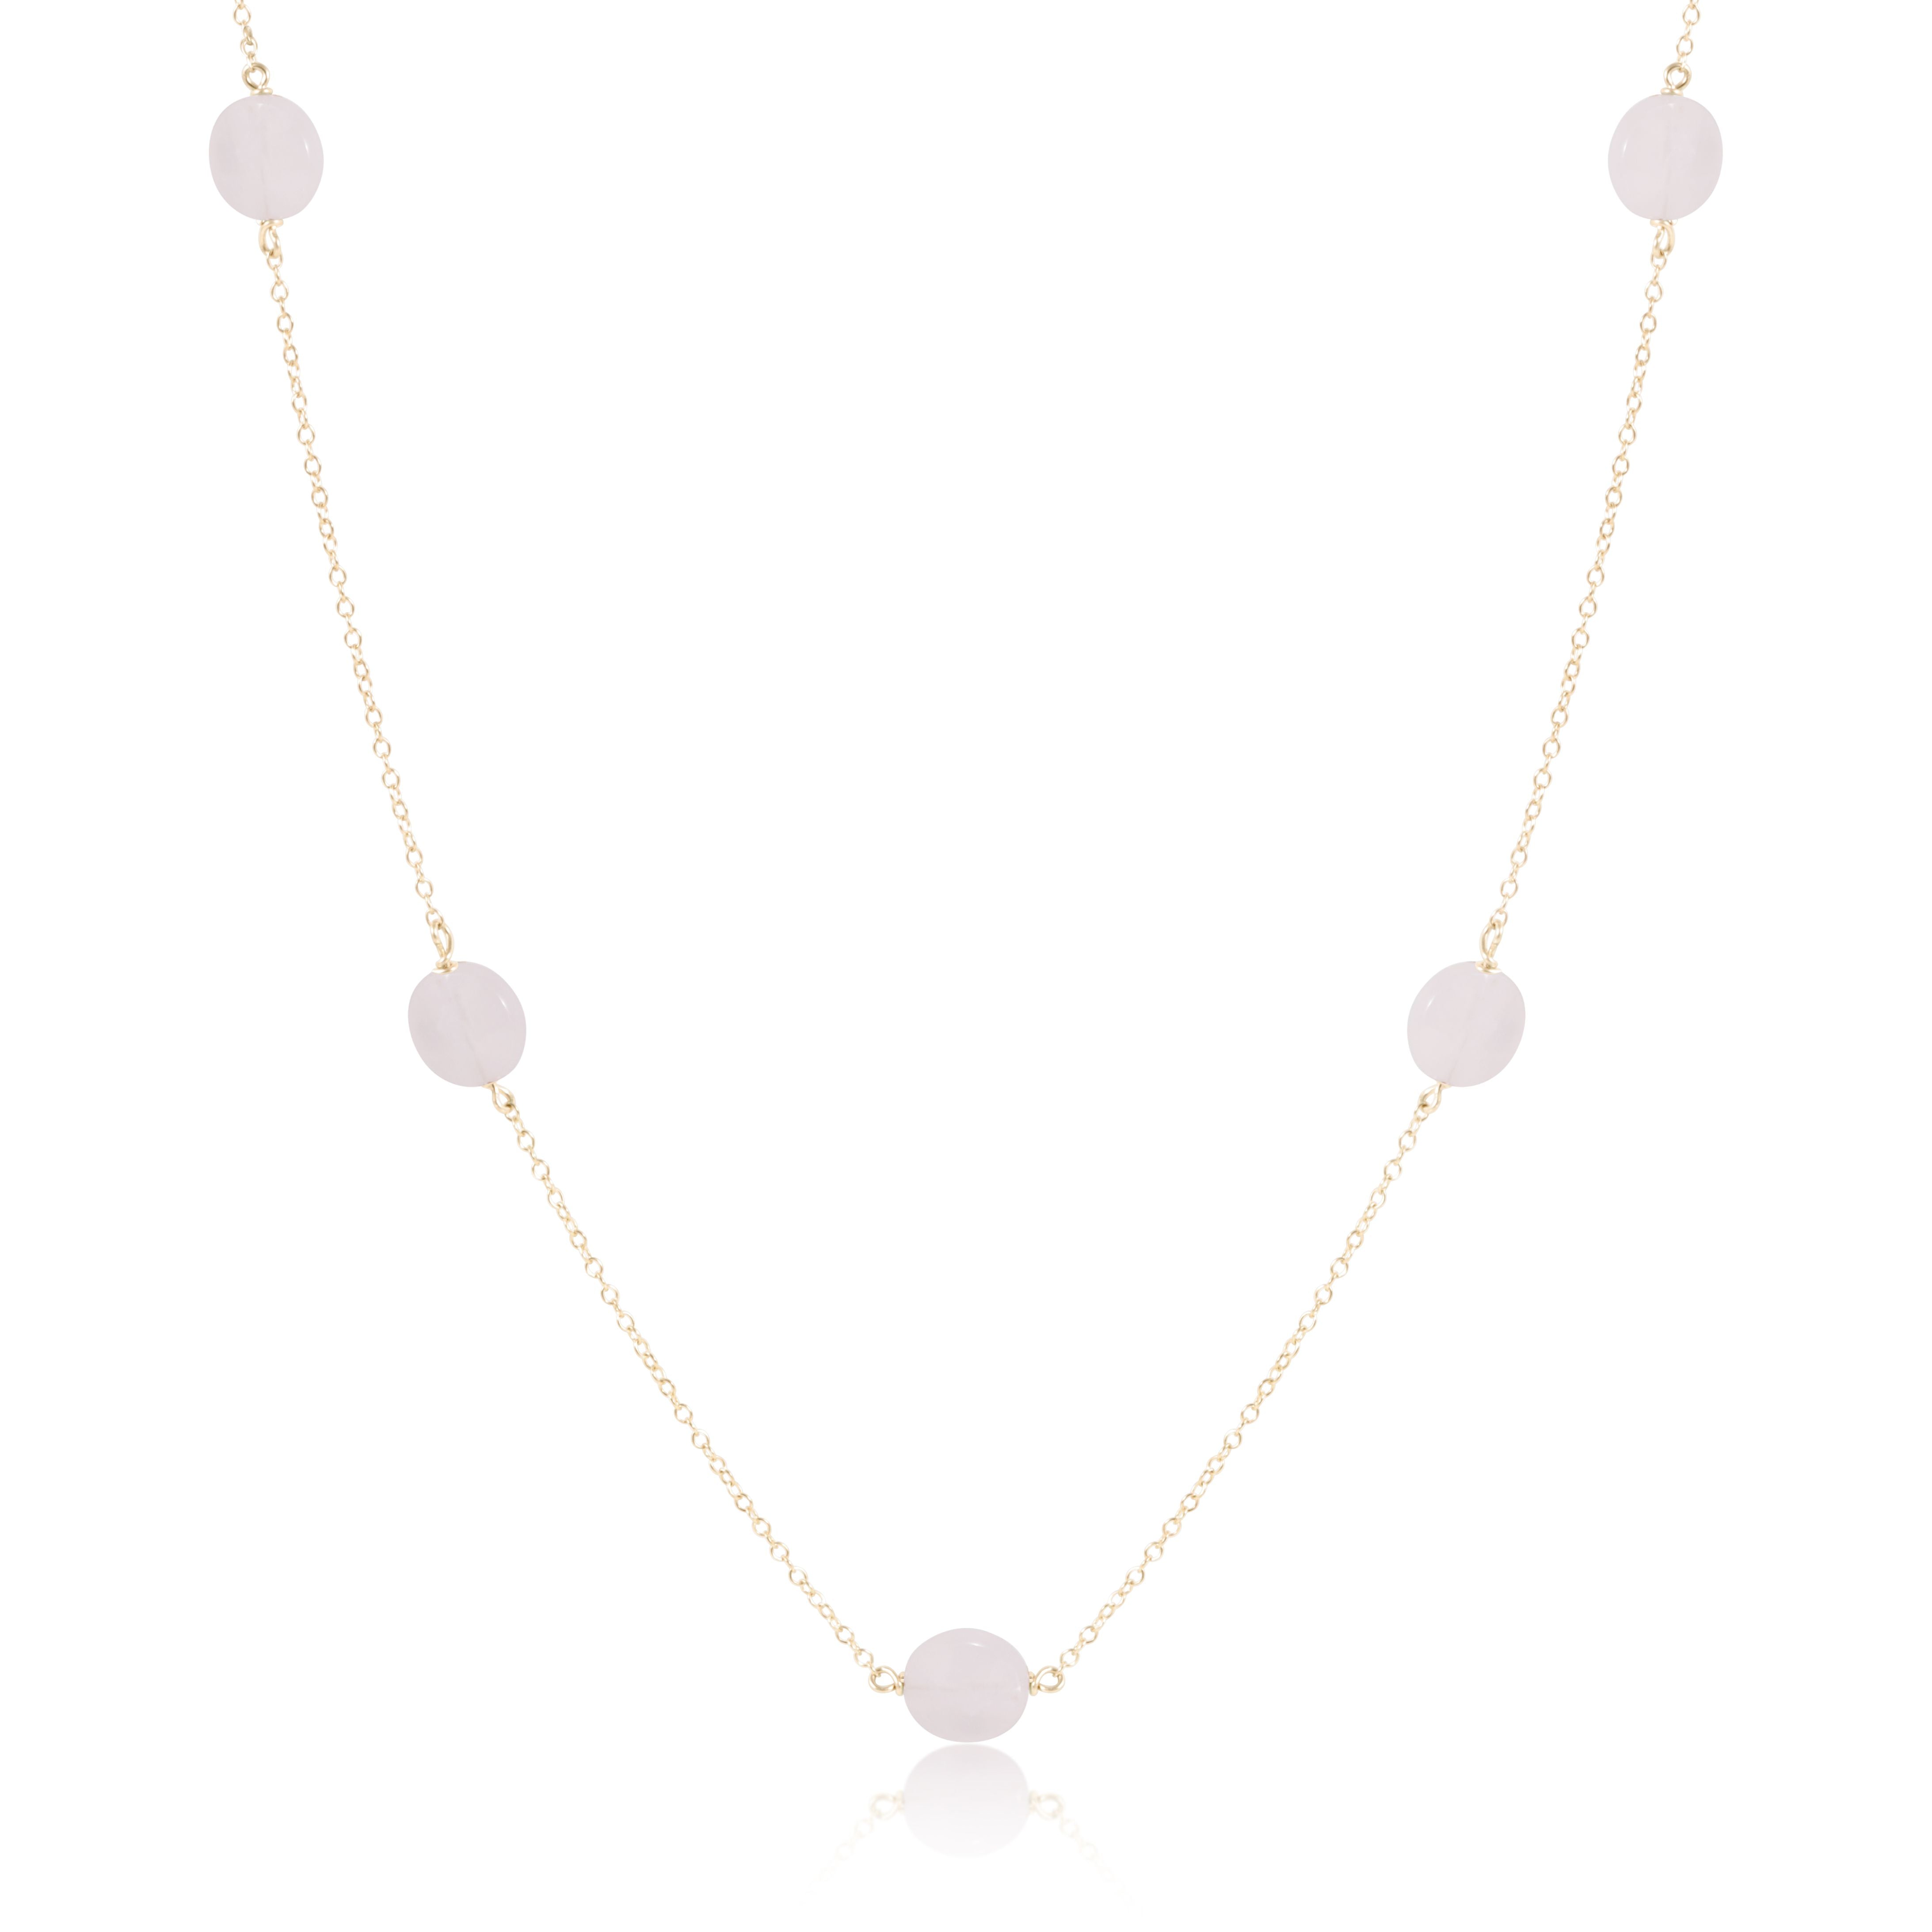 Admire Simplicity Chain Choker Necklace, 15"